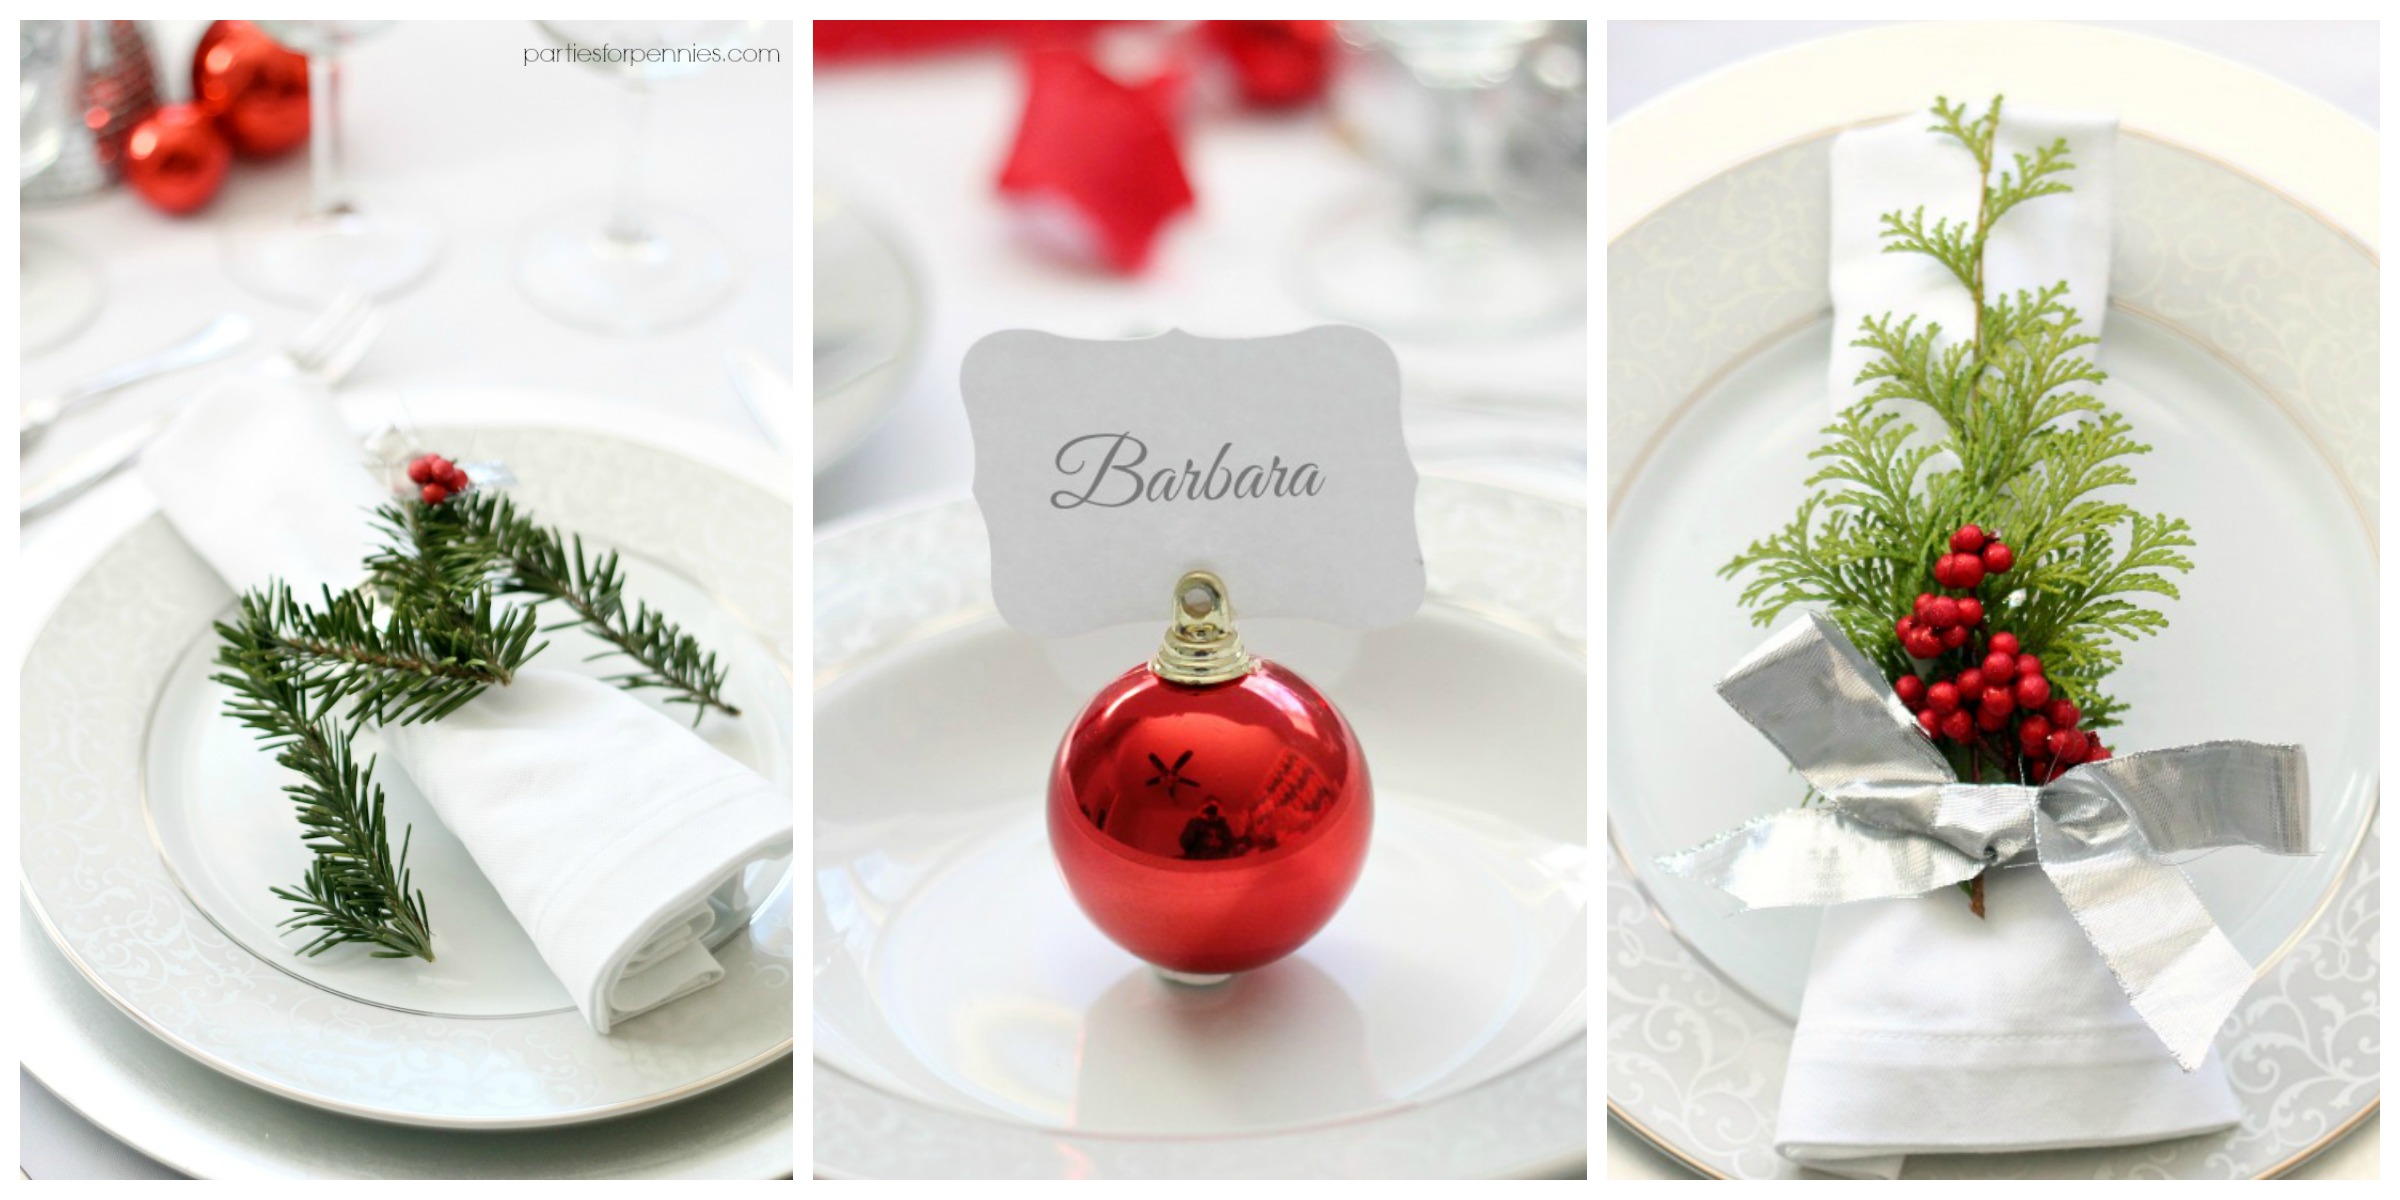 Formal Place Setting Guide - Parties for Pennies